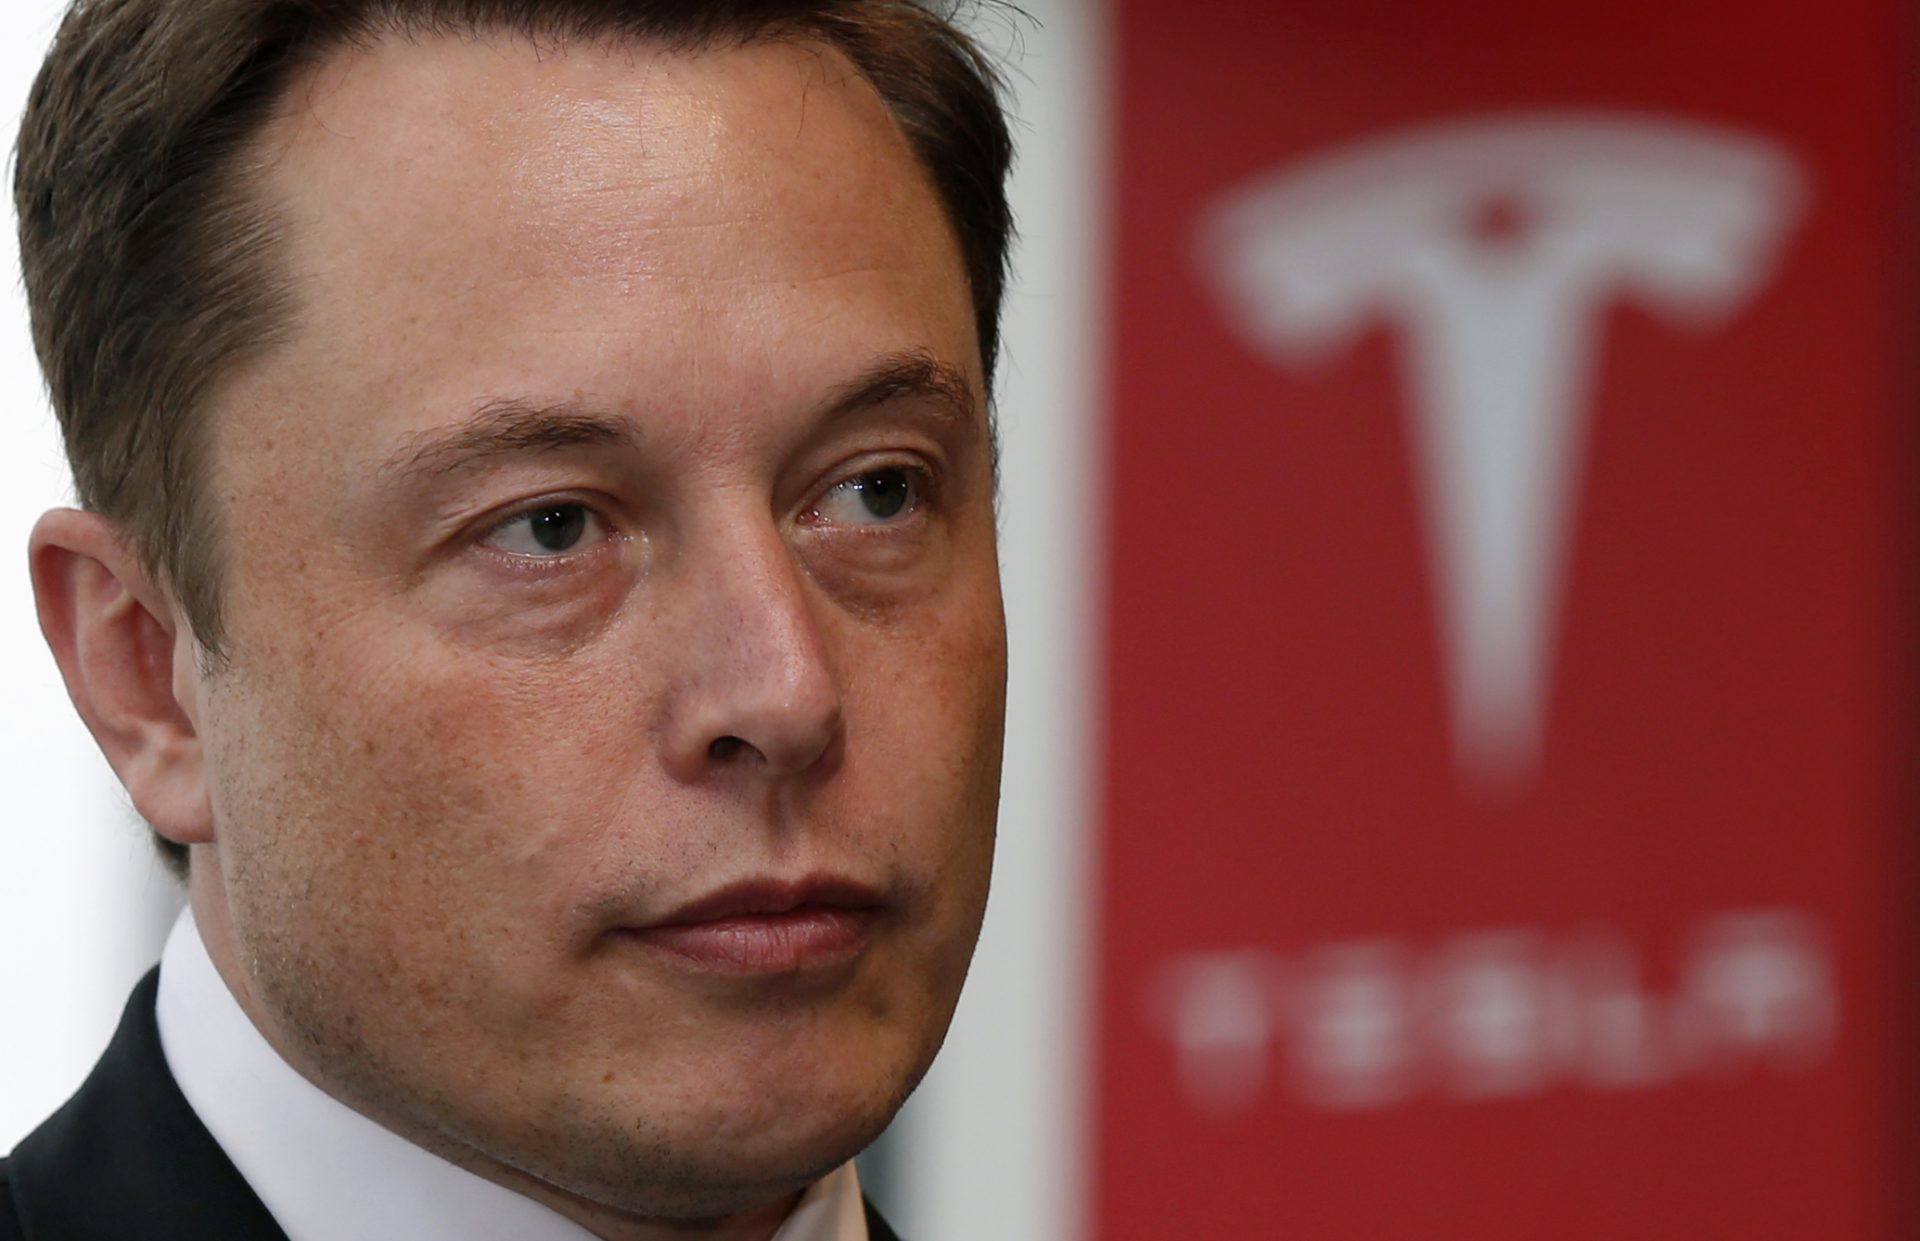 Tesla Motors Inc Chief Executive Elon Musk Pauses During A News Conference In Tokyo